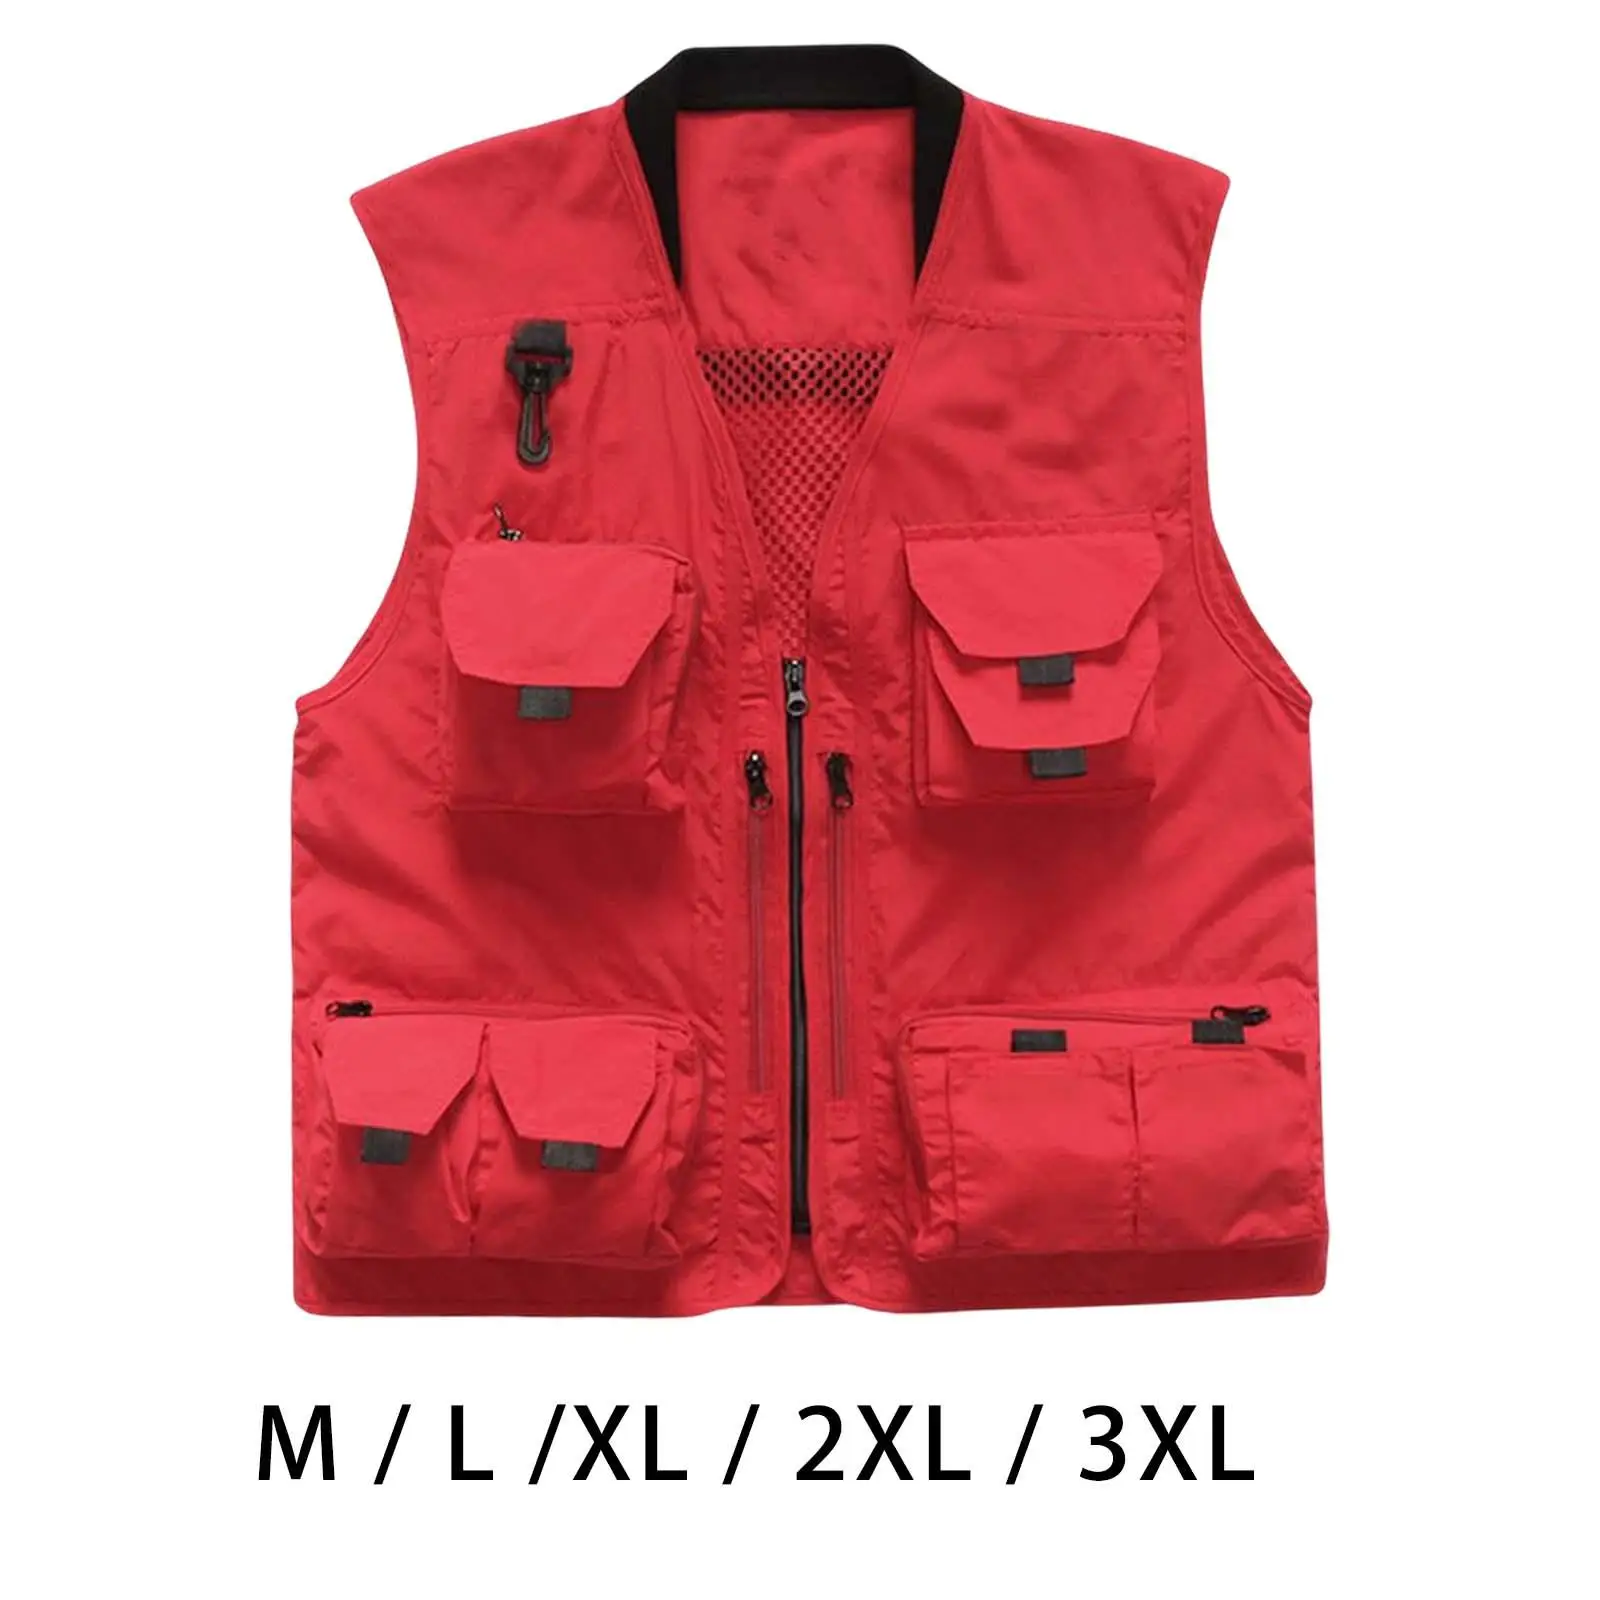 Mens Fishing Vest Costume Clothes Lightweight Fishermen with Multi Pockets Photography Modern Jacket for Outdoor Camping Sports